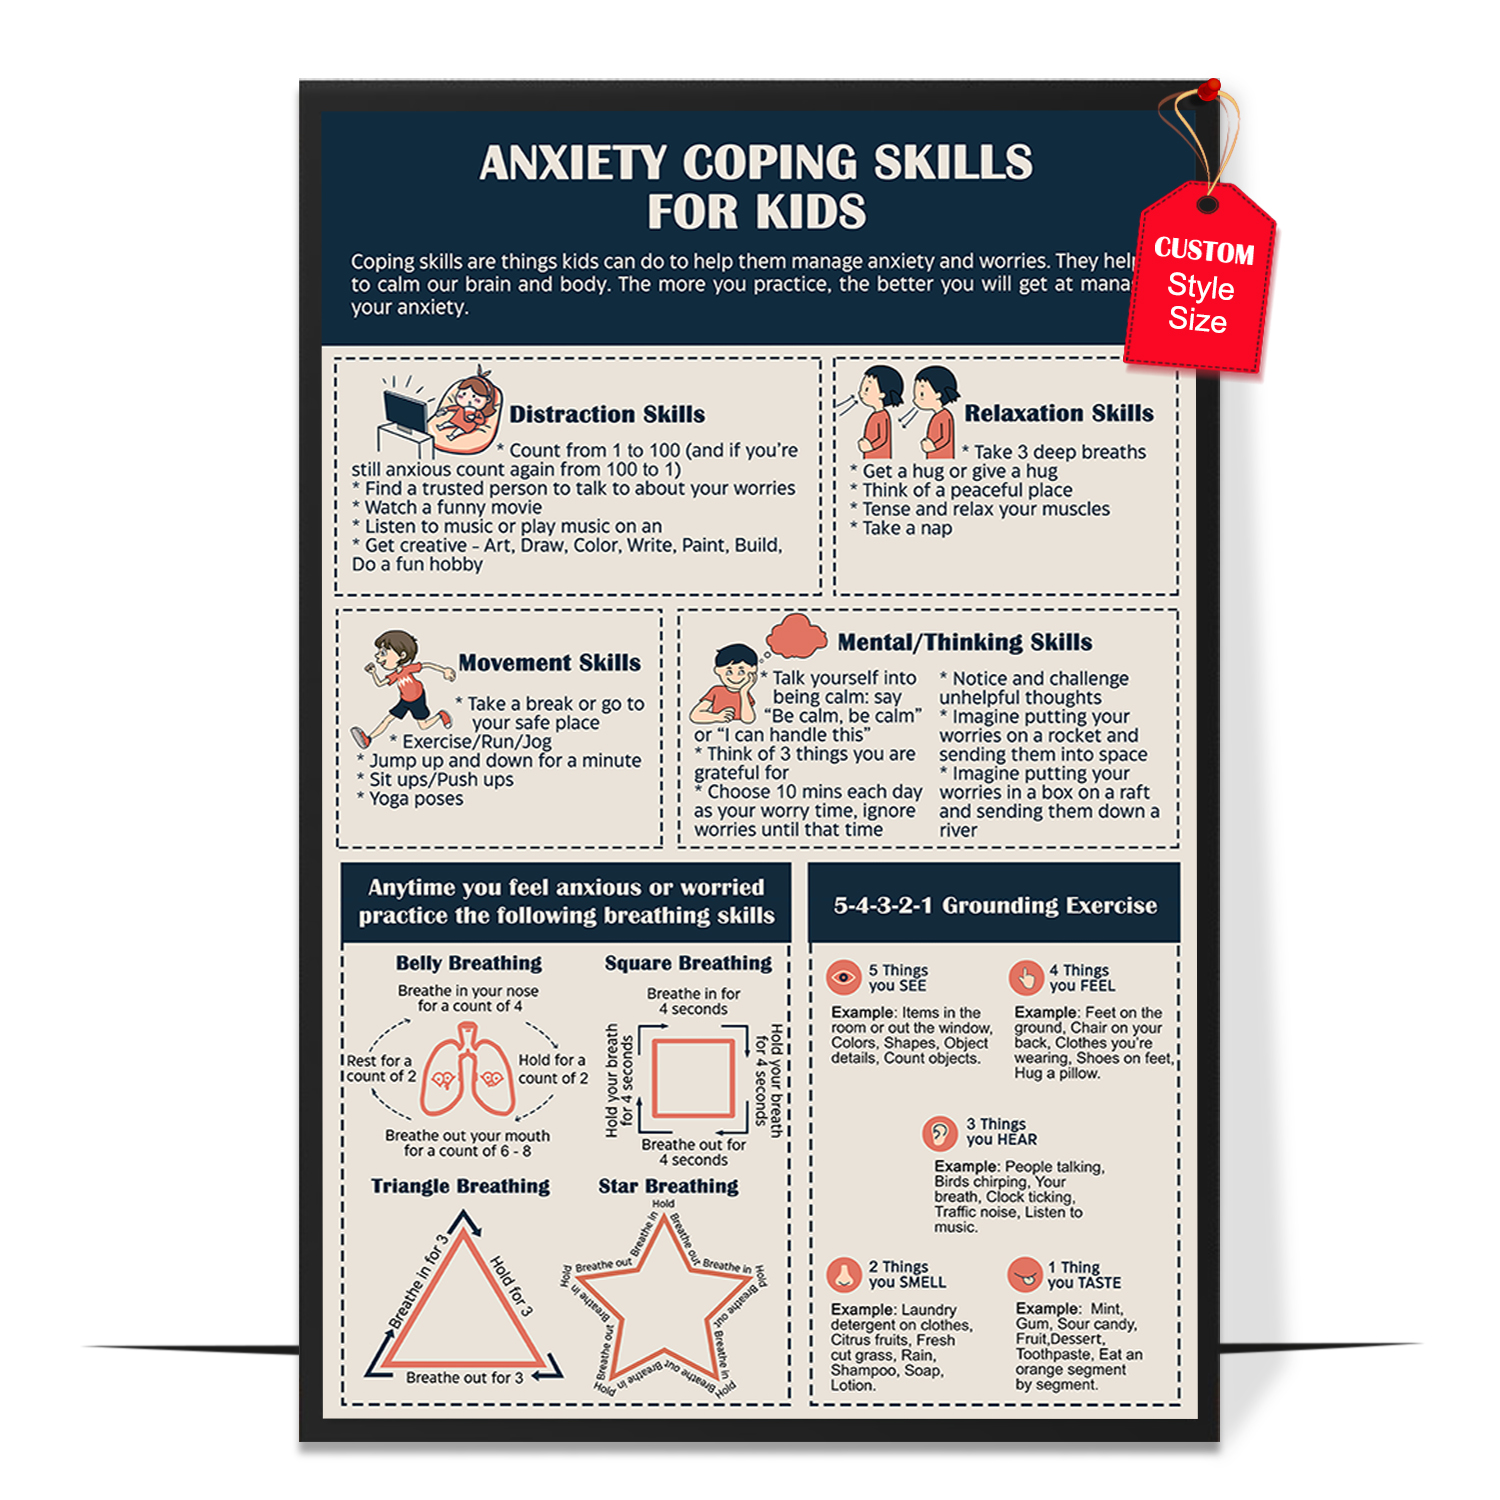 Anxiety Coping Skills for Kids Poster